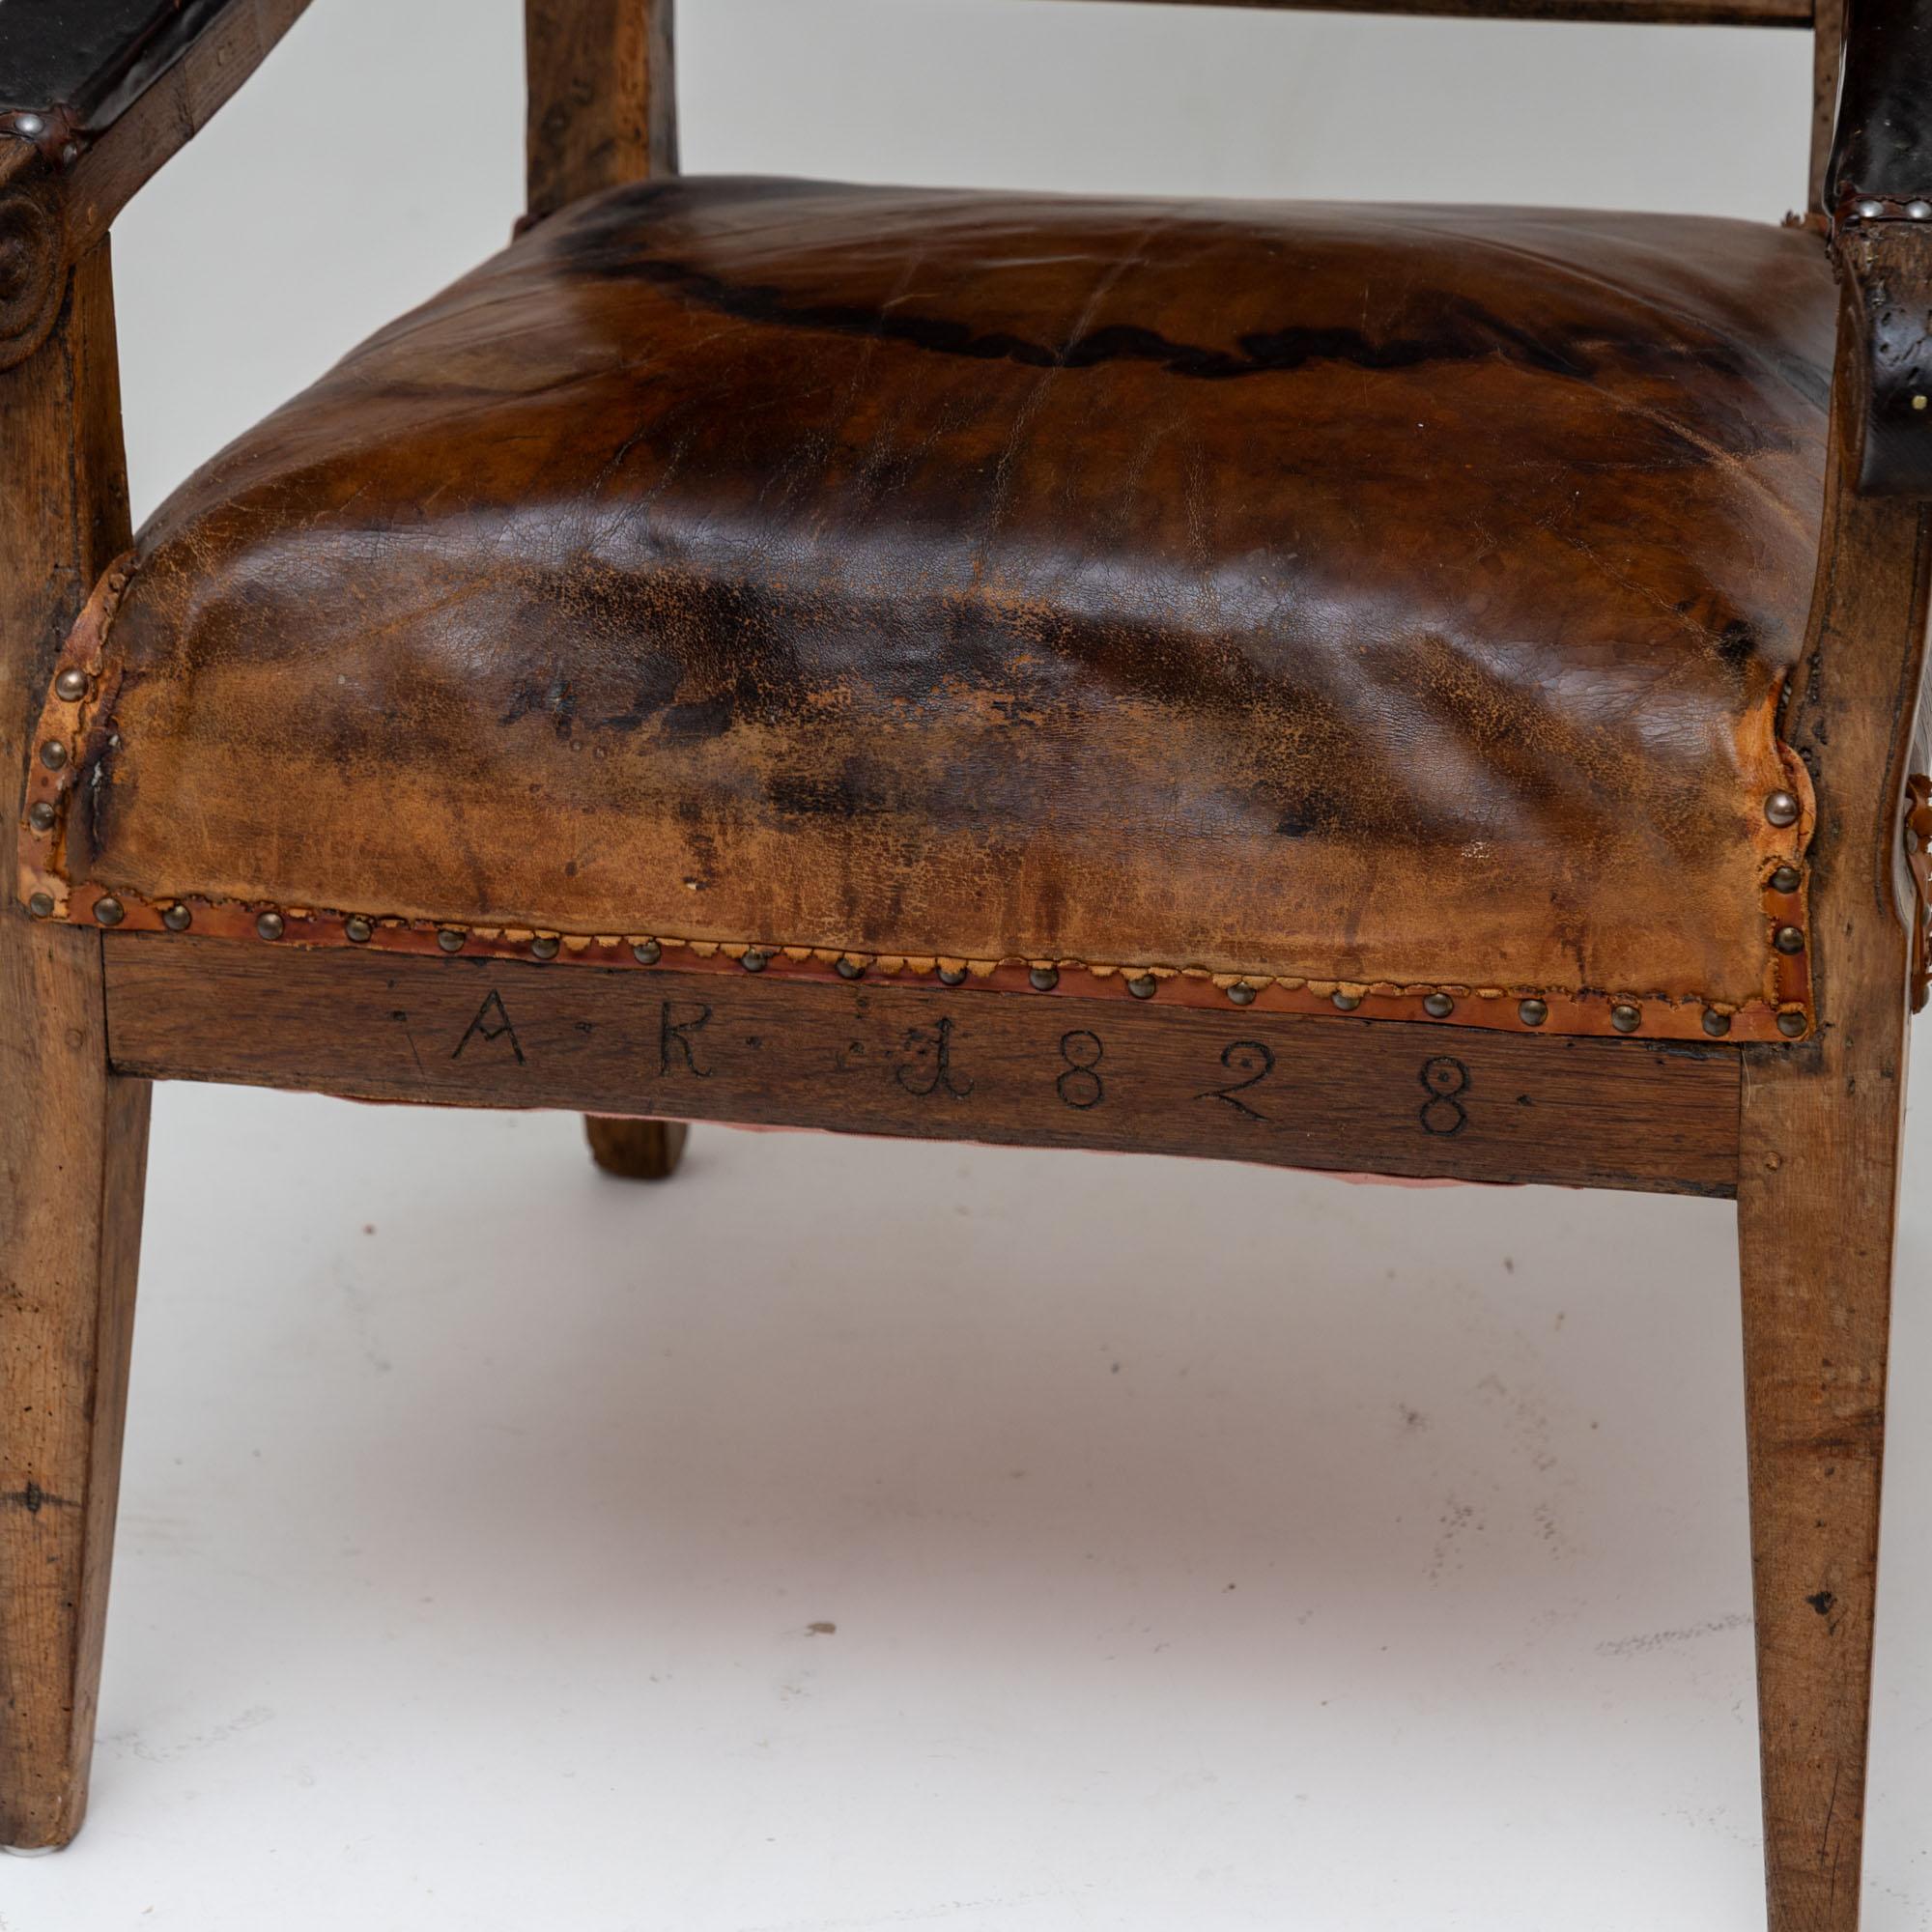 Armchair with leather upholstery, dated 1828 In Fair Condition For Sale In Greding, DE